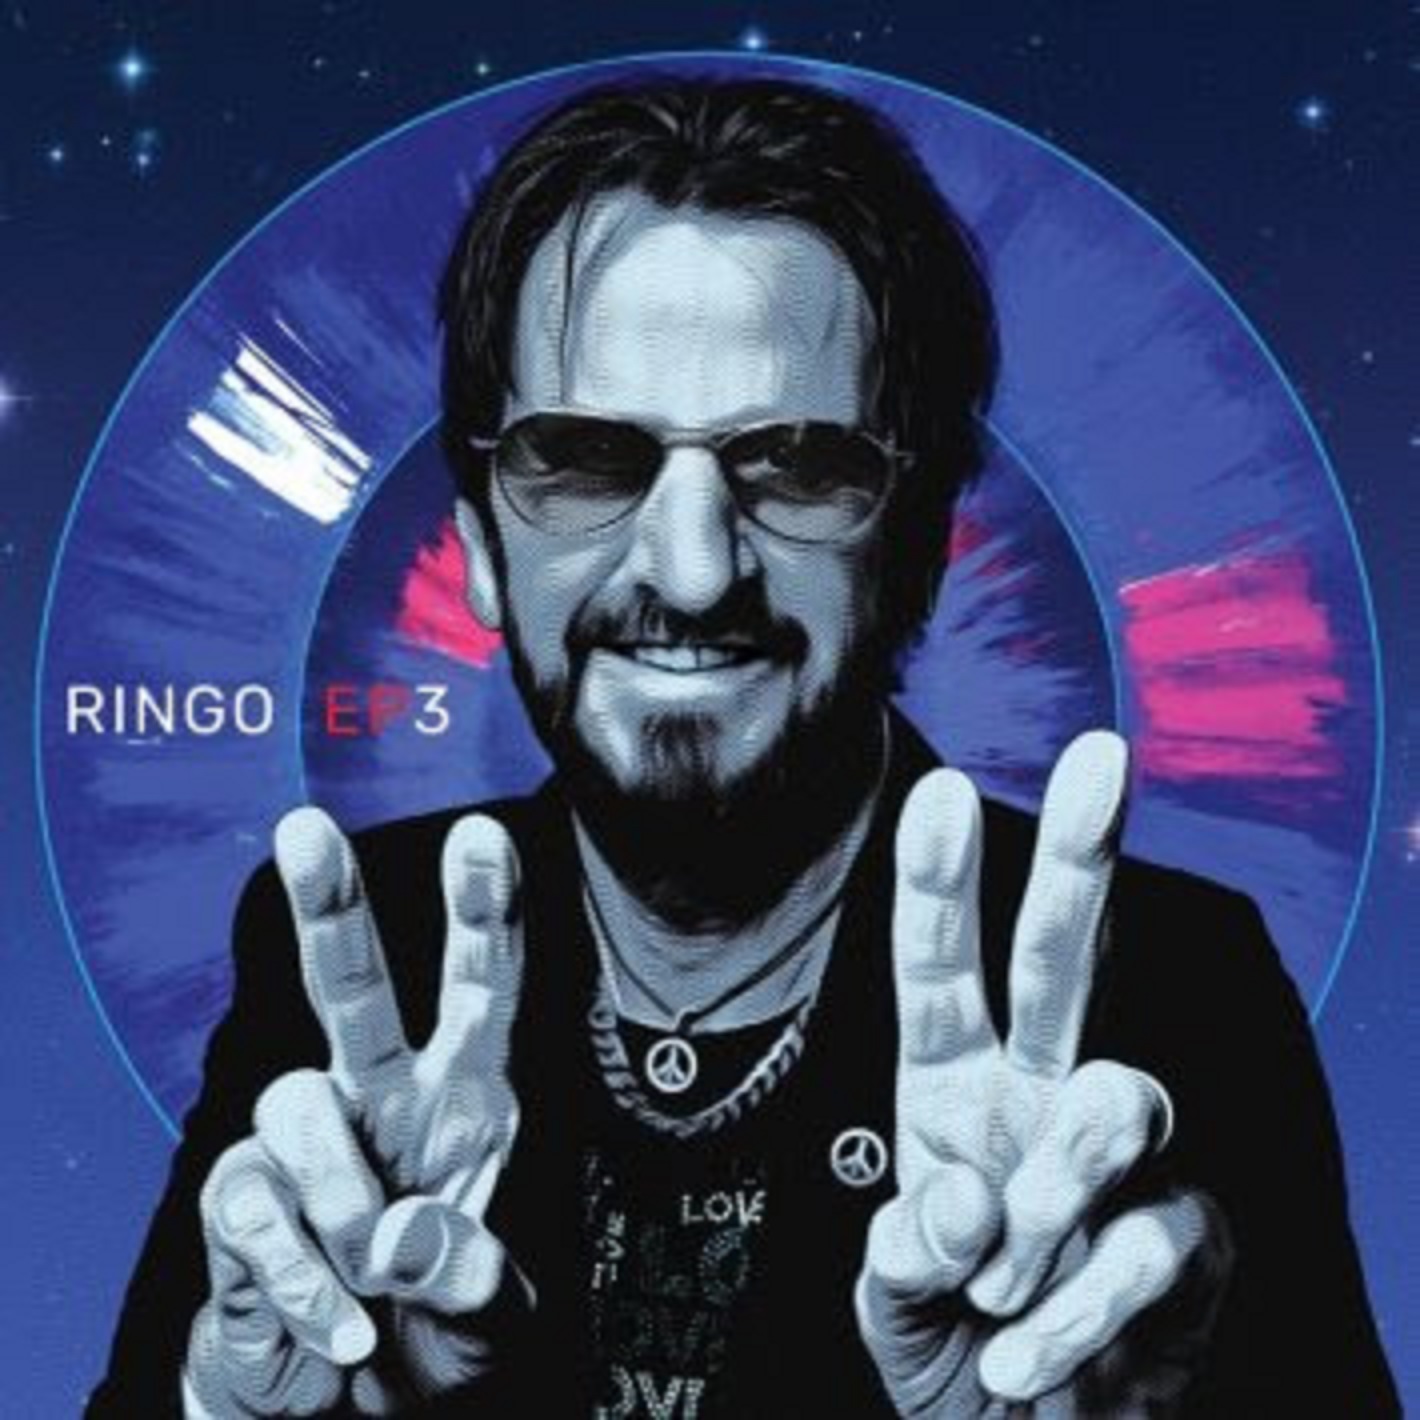 Ringo Starr Releases 'EP3' Featuring 4 New Tracks - Available To Pre-Order Today